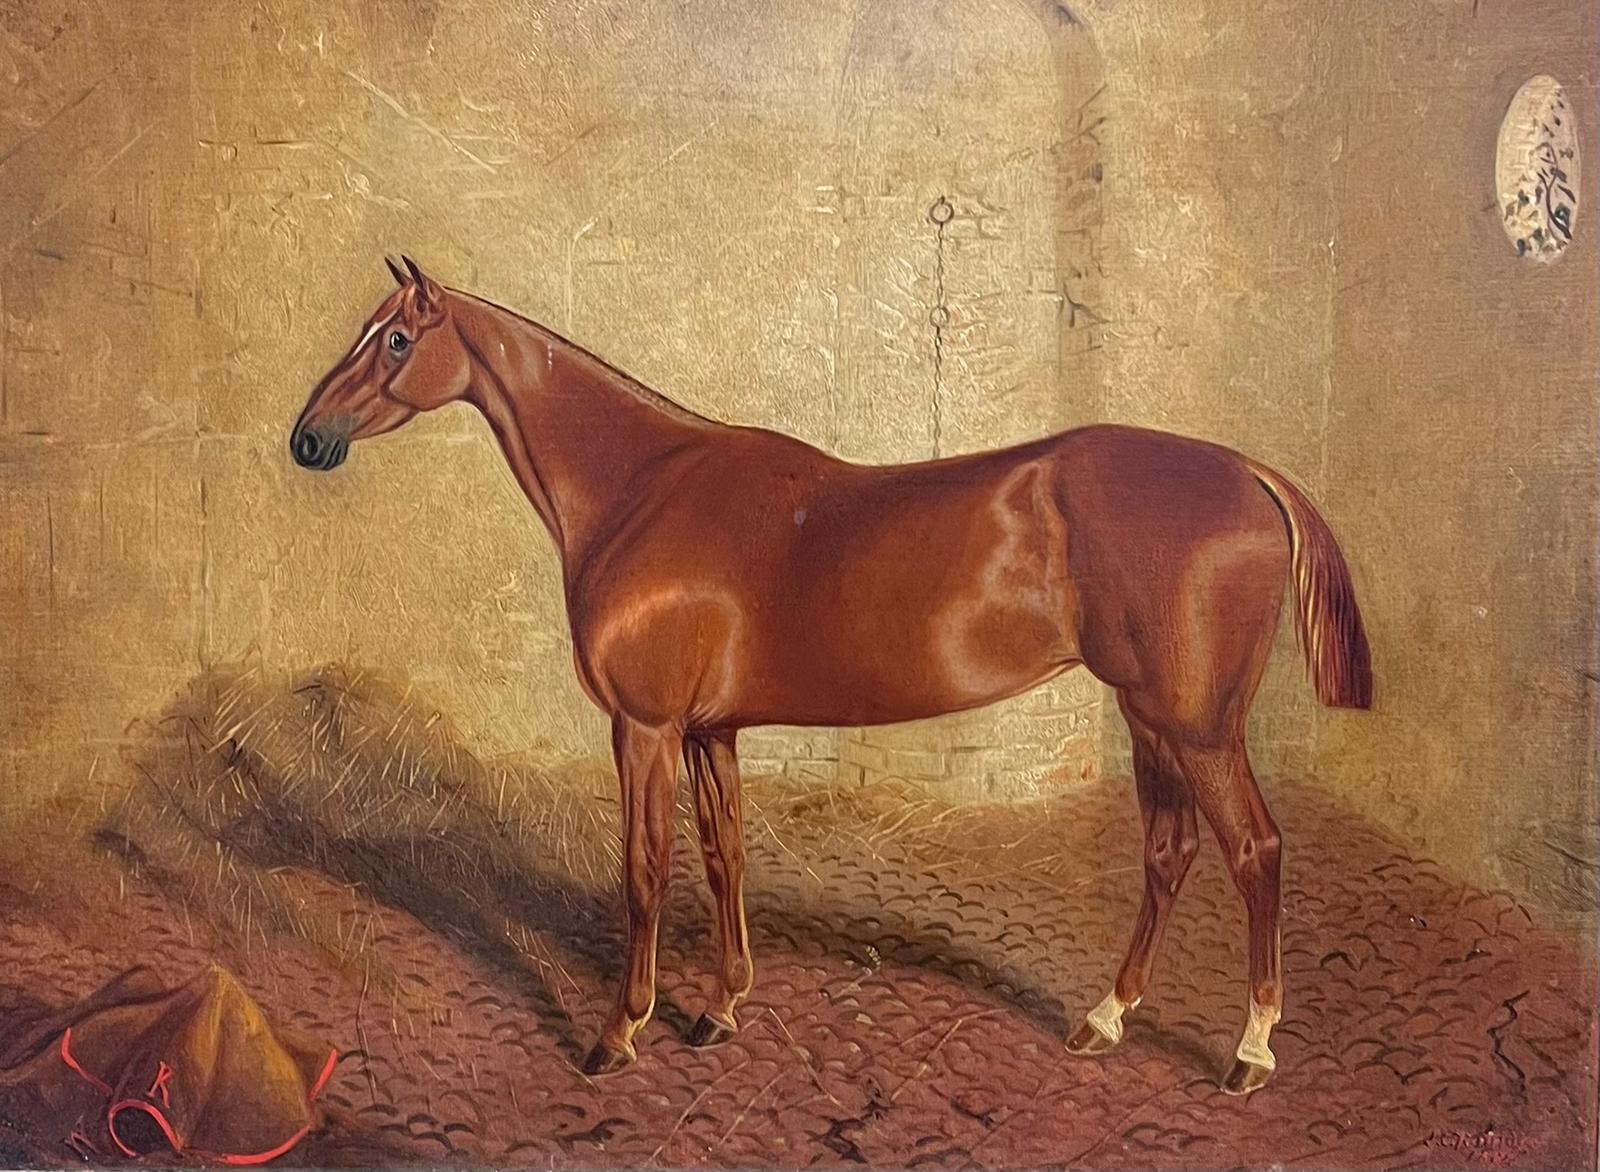 F. C. Partridge Animal Painting - Fine 19th Century British Sporting Art Oil Painting Horse in Stable Interior